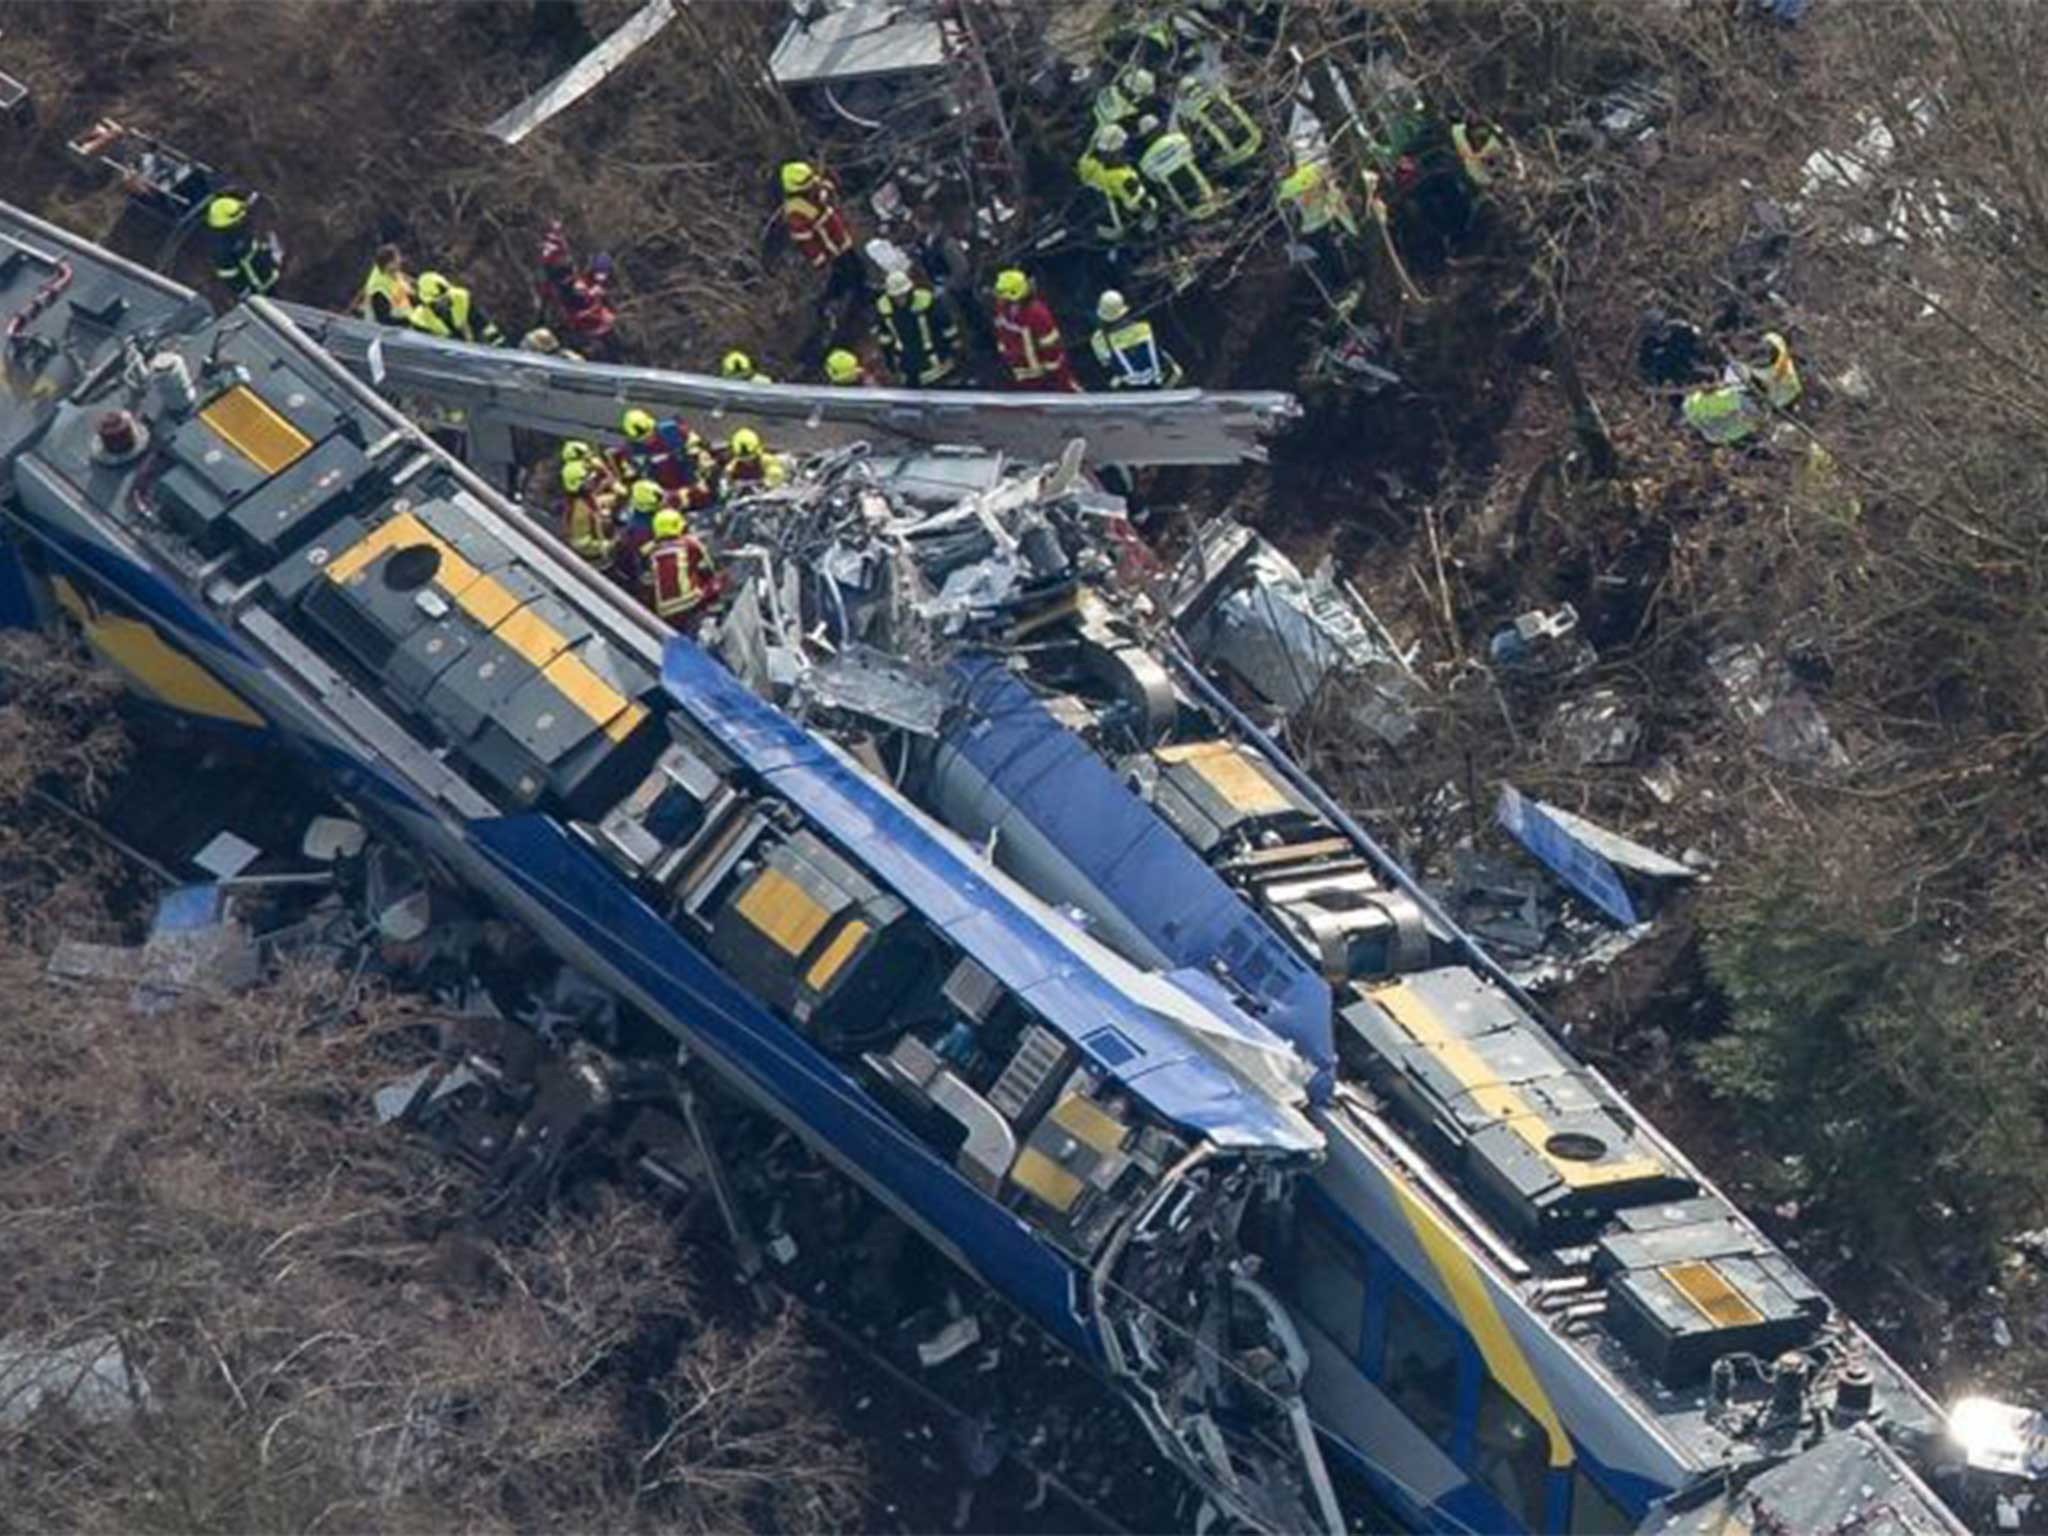 The scene near Bad Aibling, in Bavaria, Germany, after two commuter trains collided